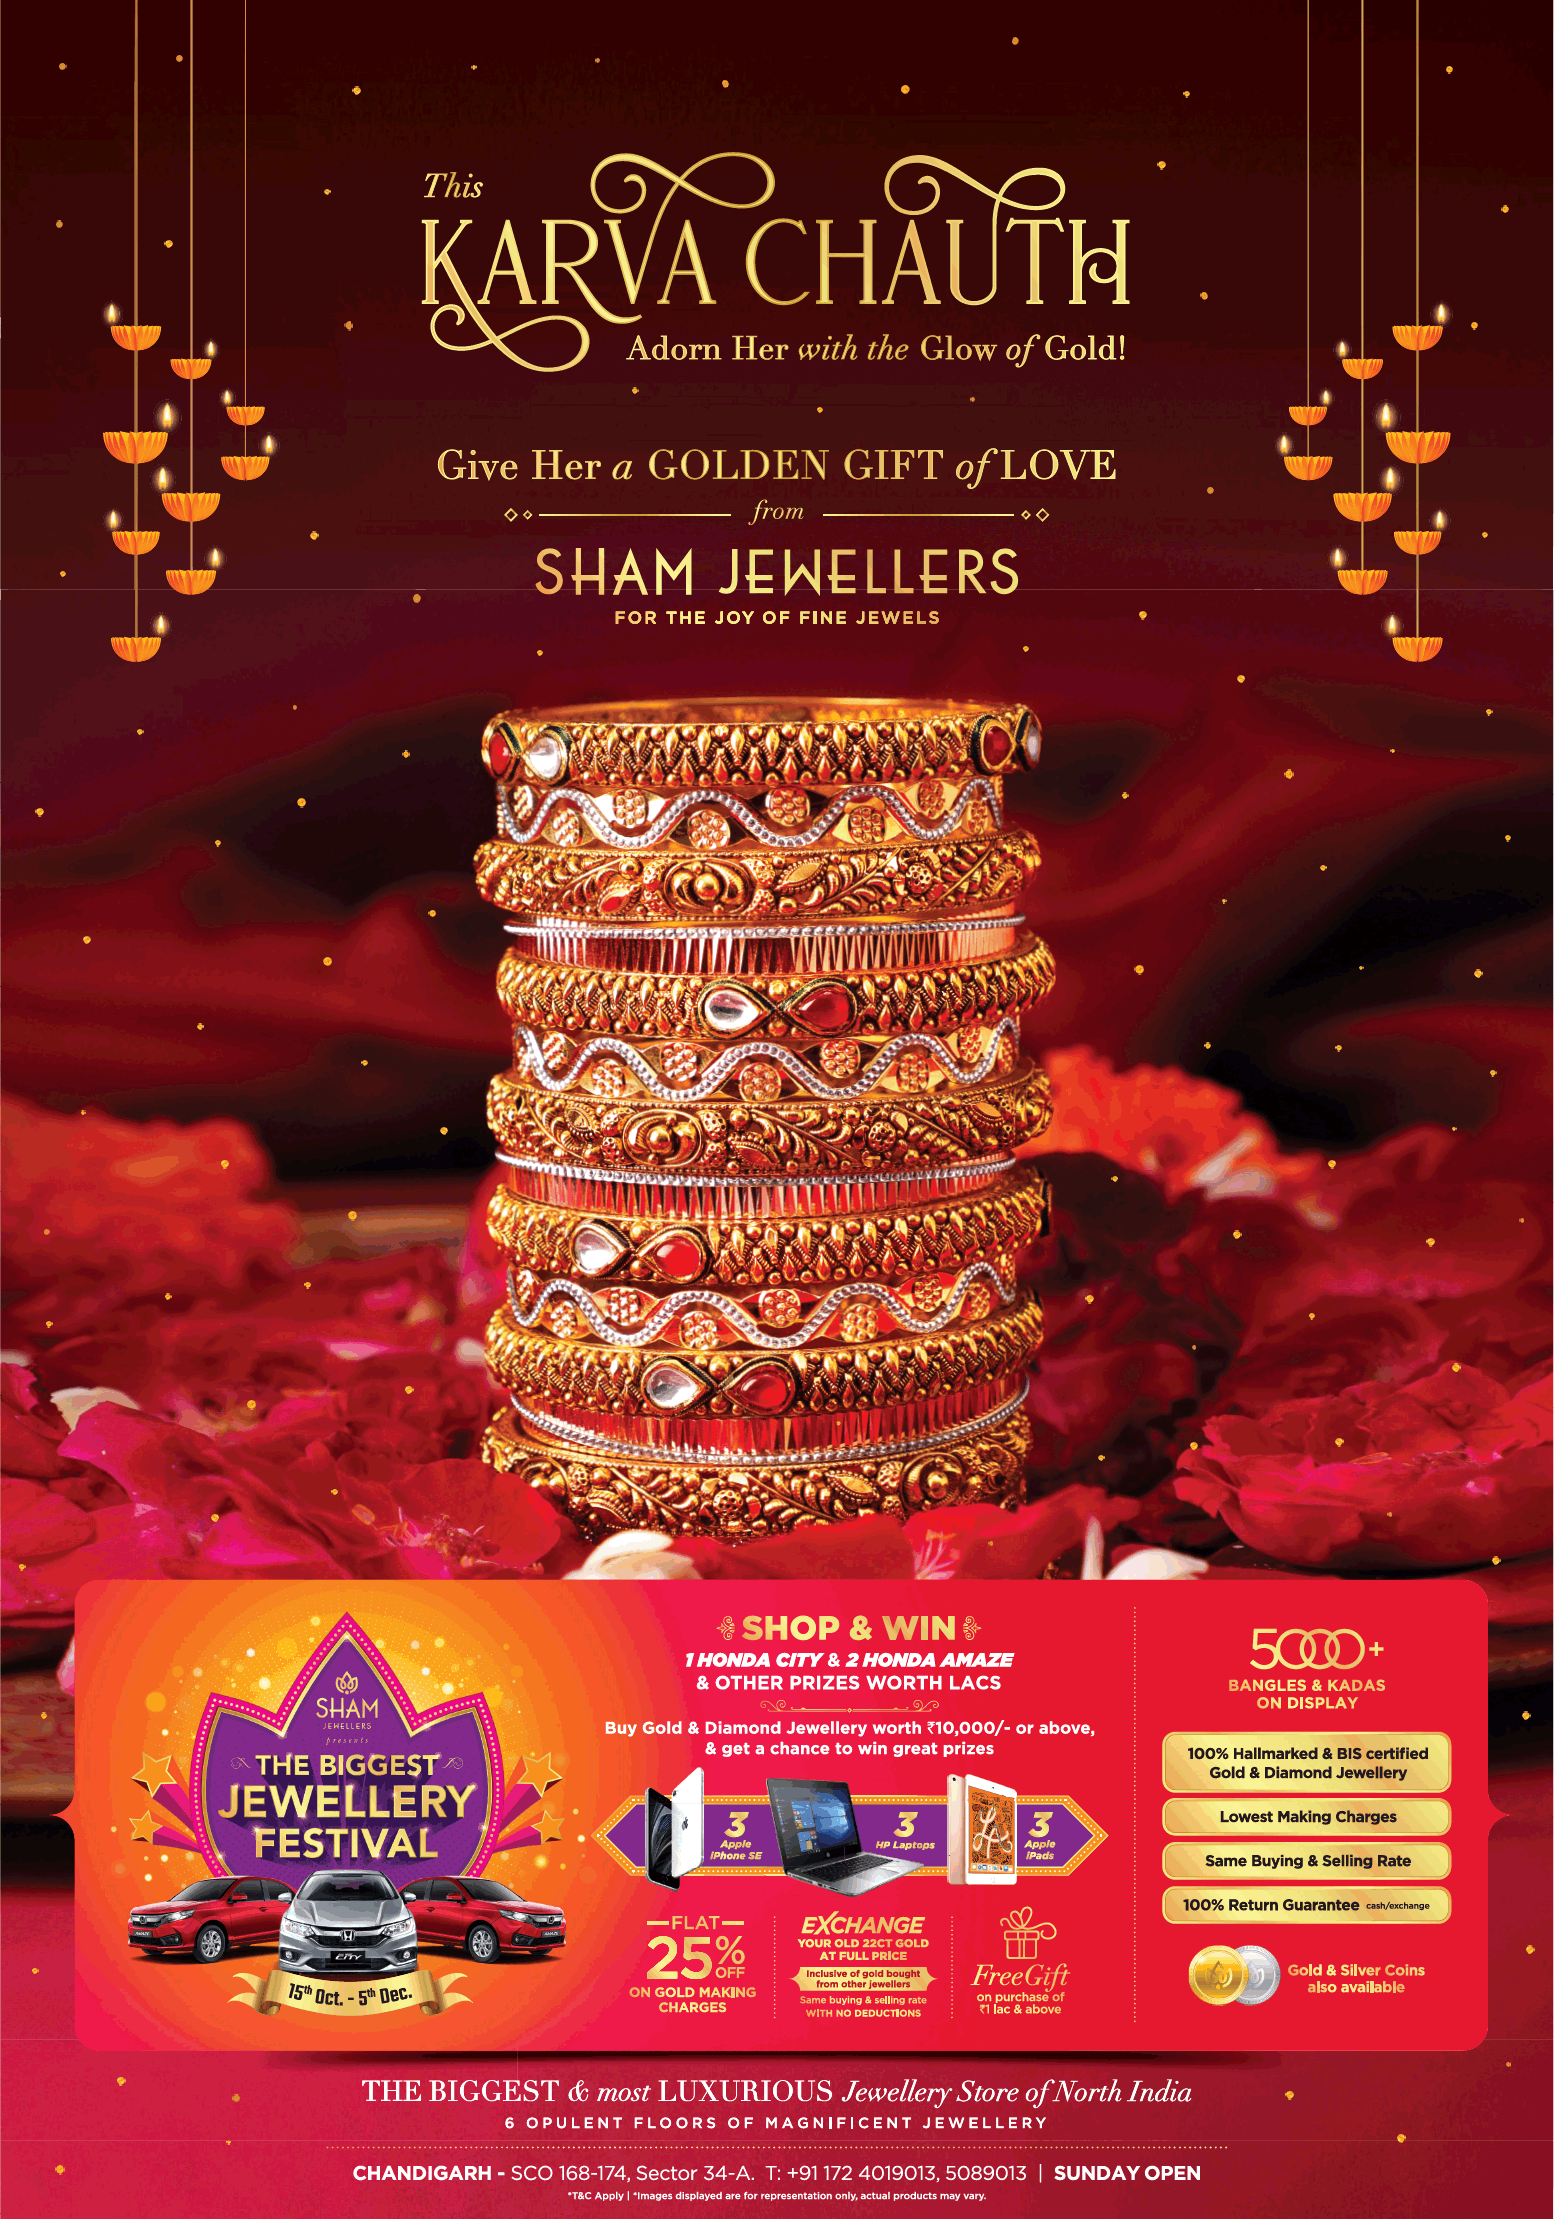 sham-jewellers-this-karva-chauth-adorn-her-with-the-glow-of-gold-ad-toi-chandigarh-31-10-2020